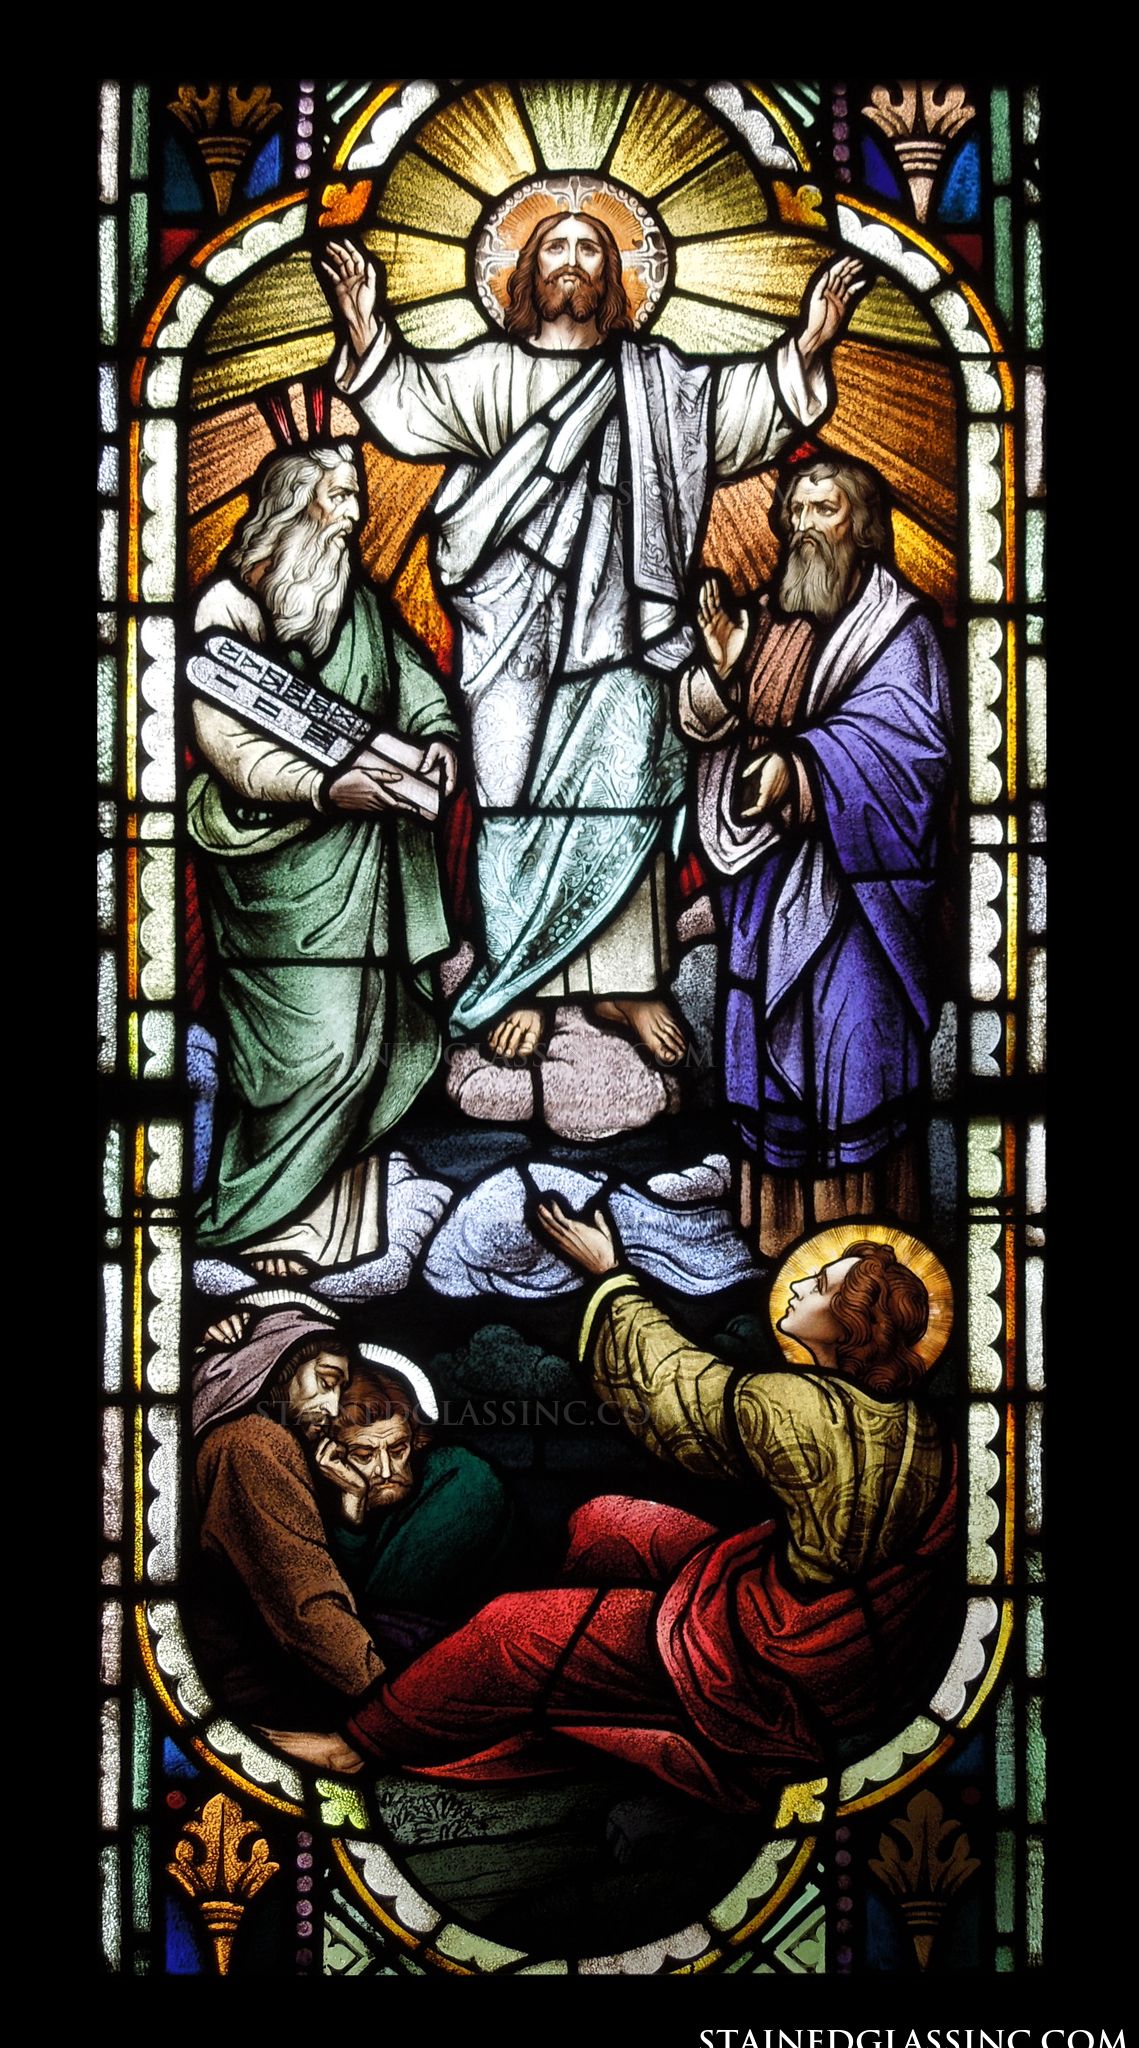 Did Stained Glass Start as a Religious Art or a Secular One?